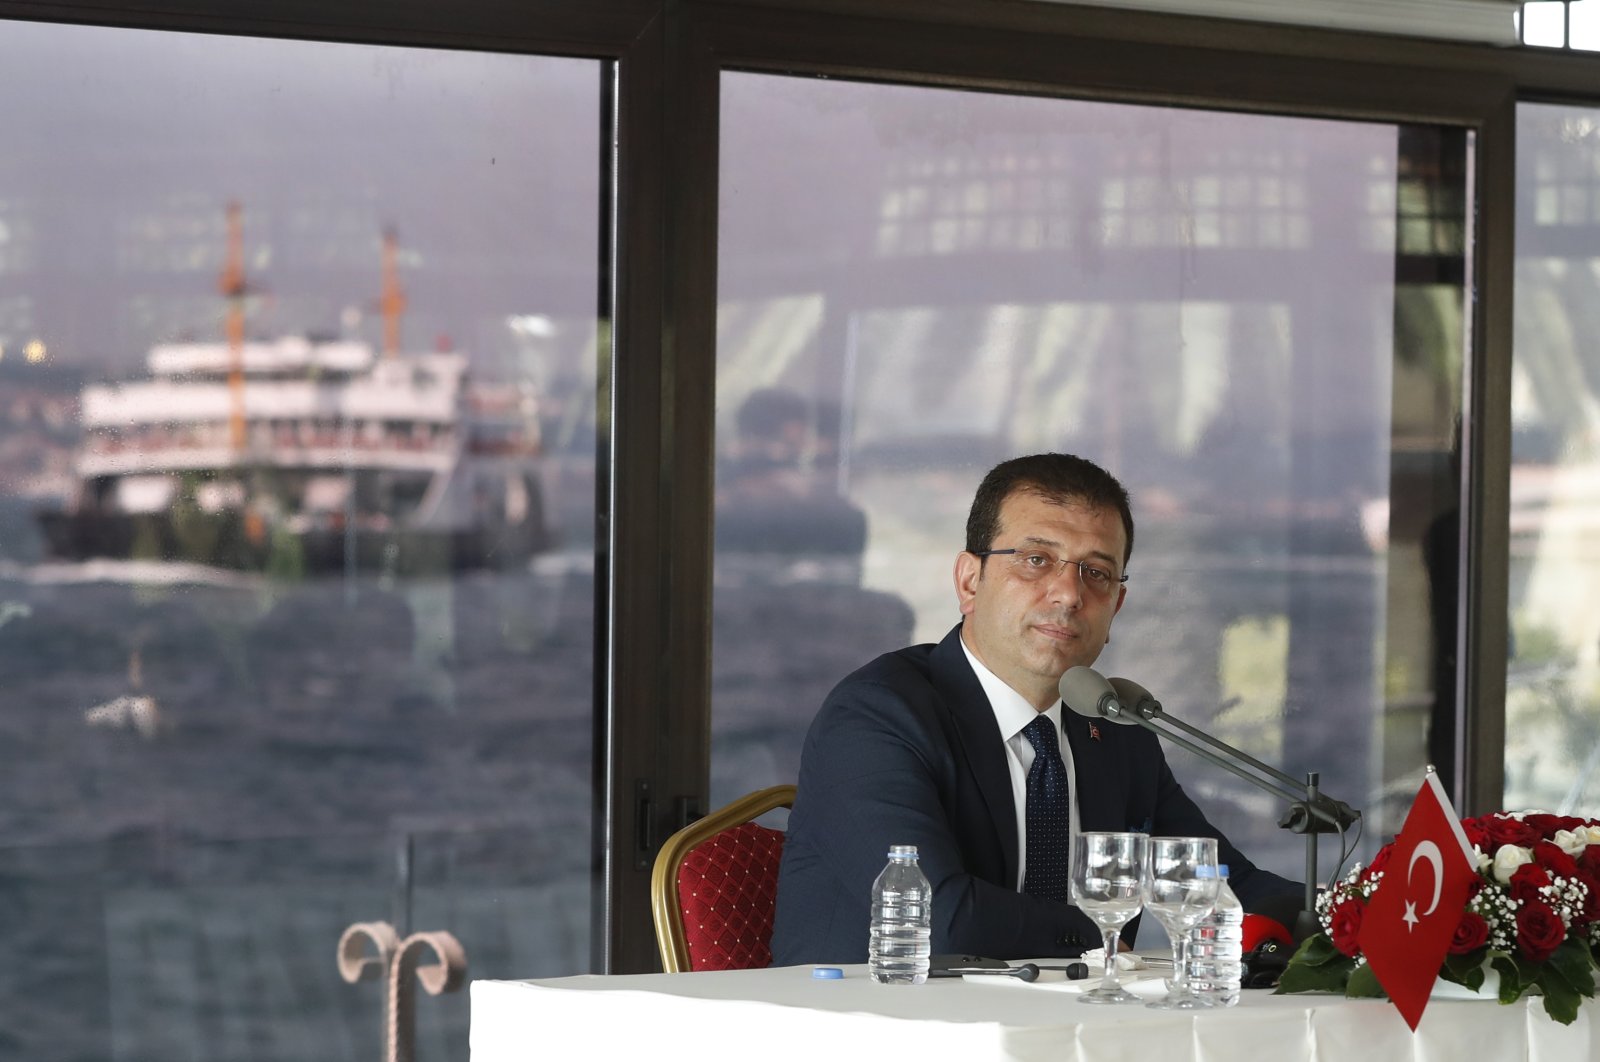 Istanbul Mayor Ekrem Imamoğlu talks to members of the foreign media a day after he took over office, in Istanbul, June 28, 2019. (AP Photo)